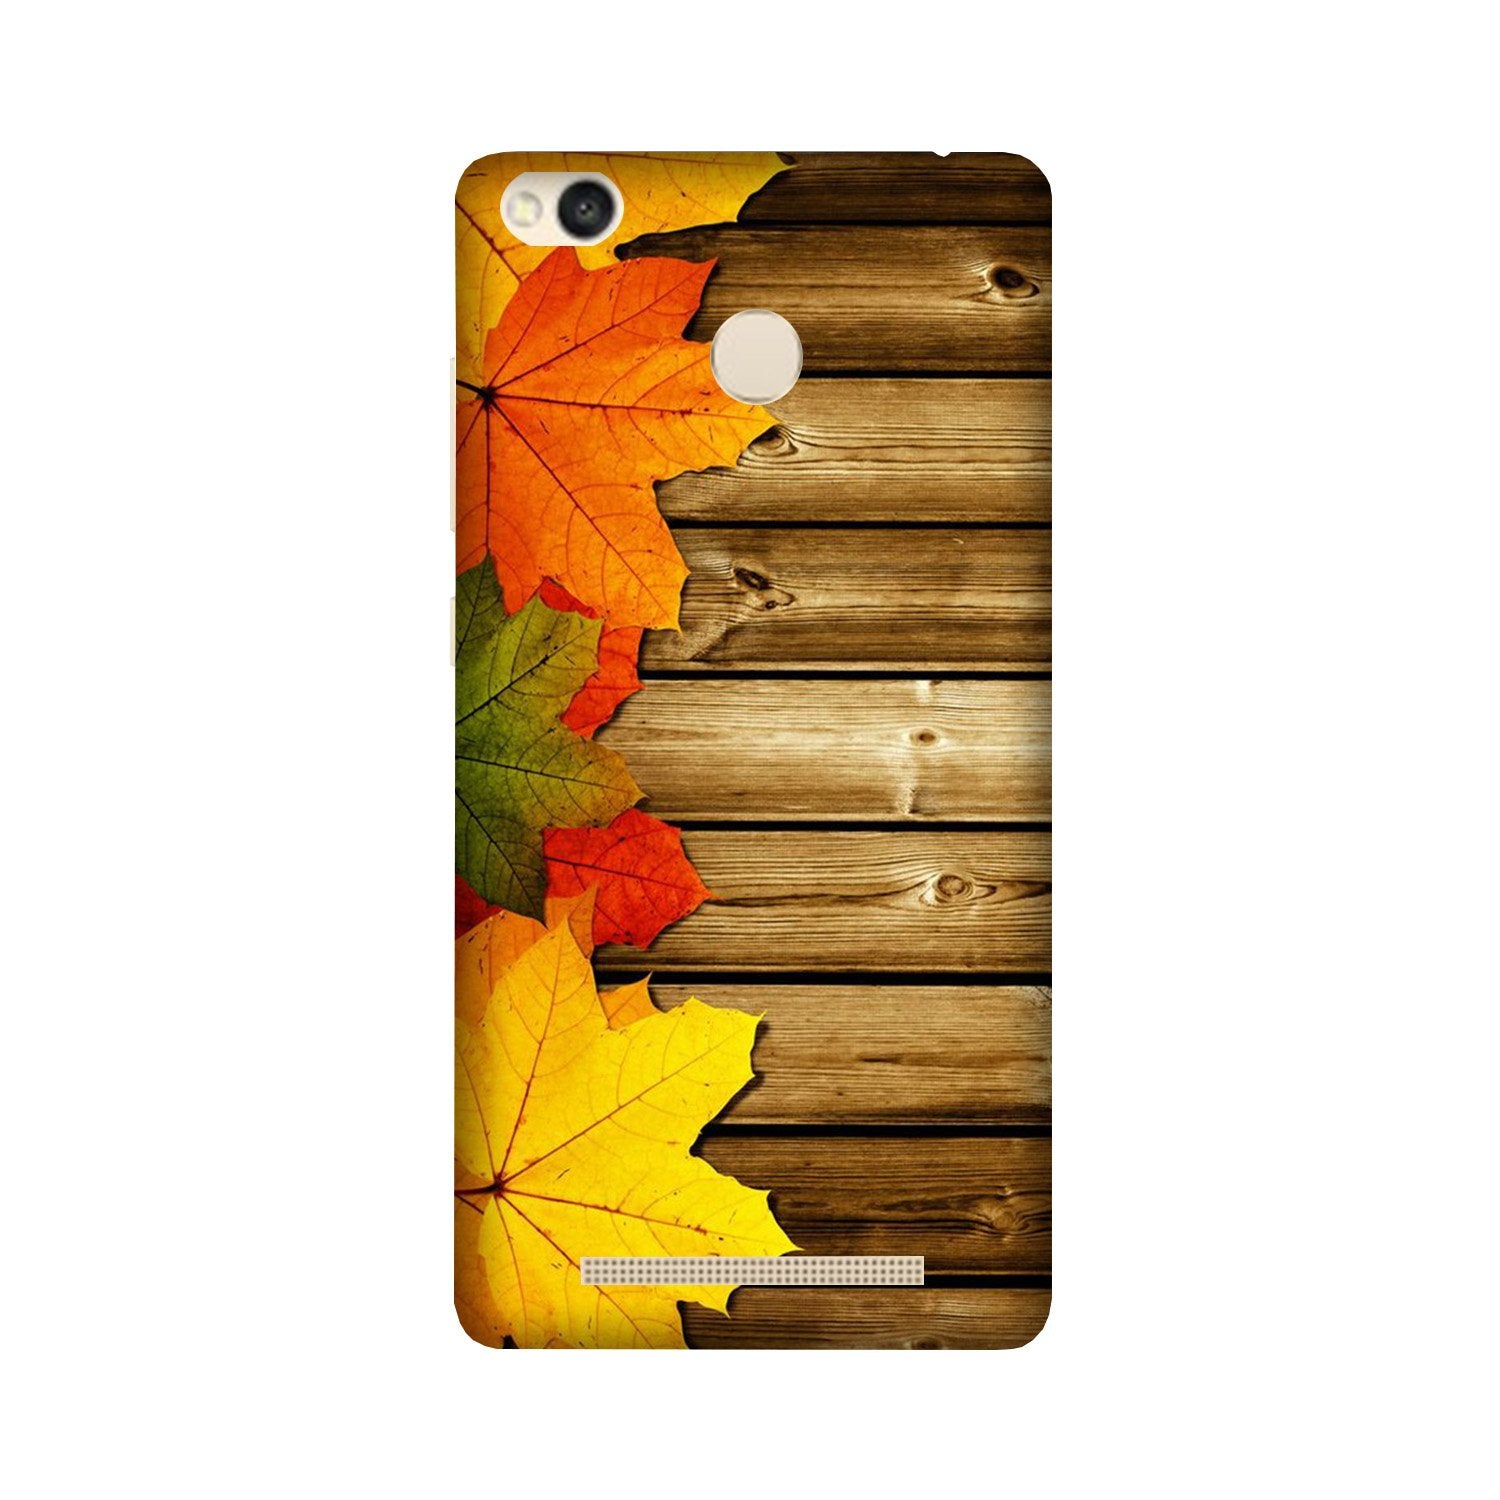 Wooden look3 Case for Redmi 3S Prime